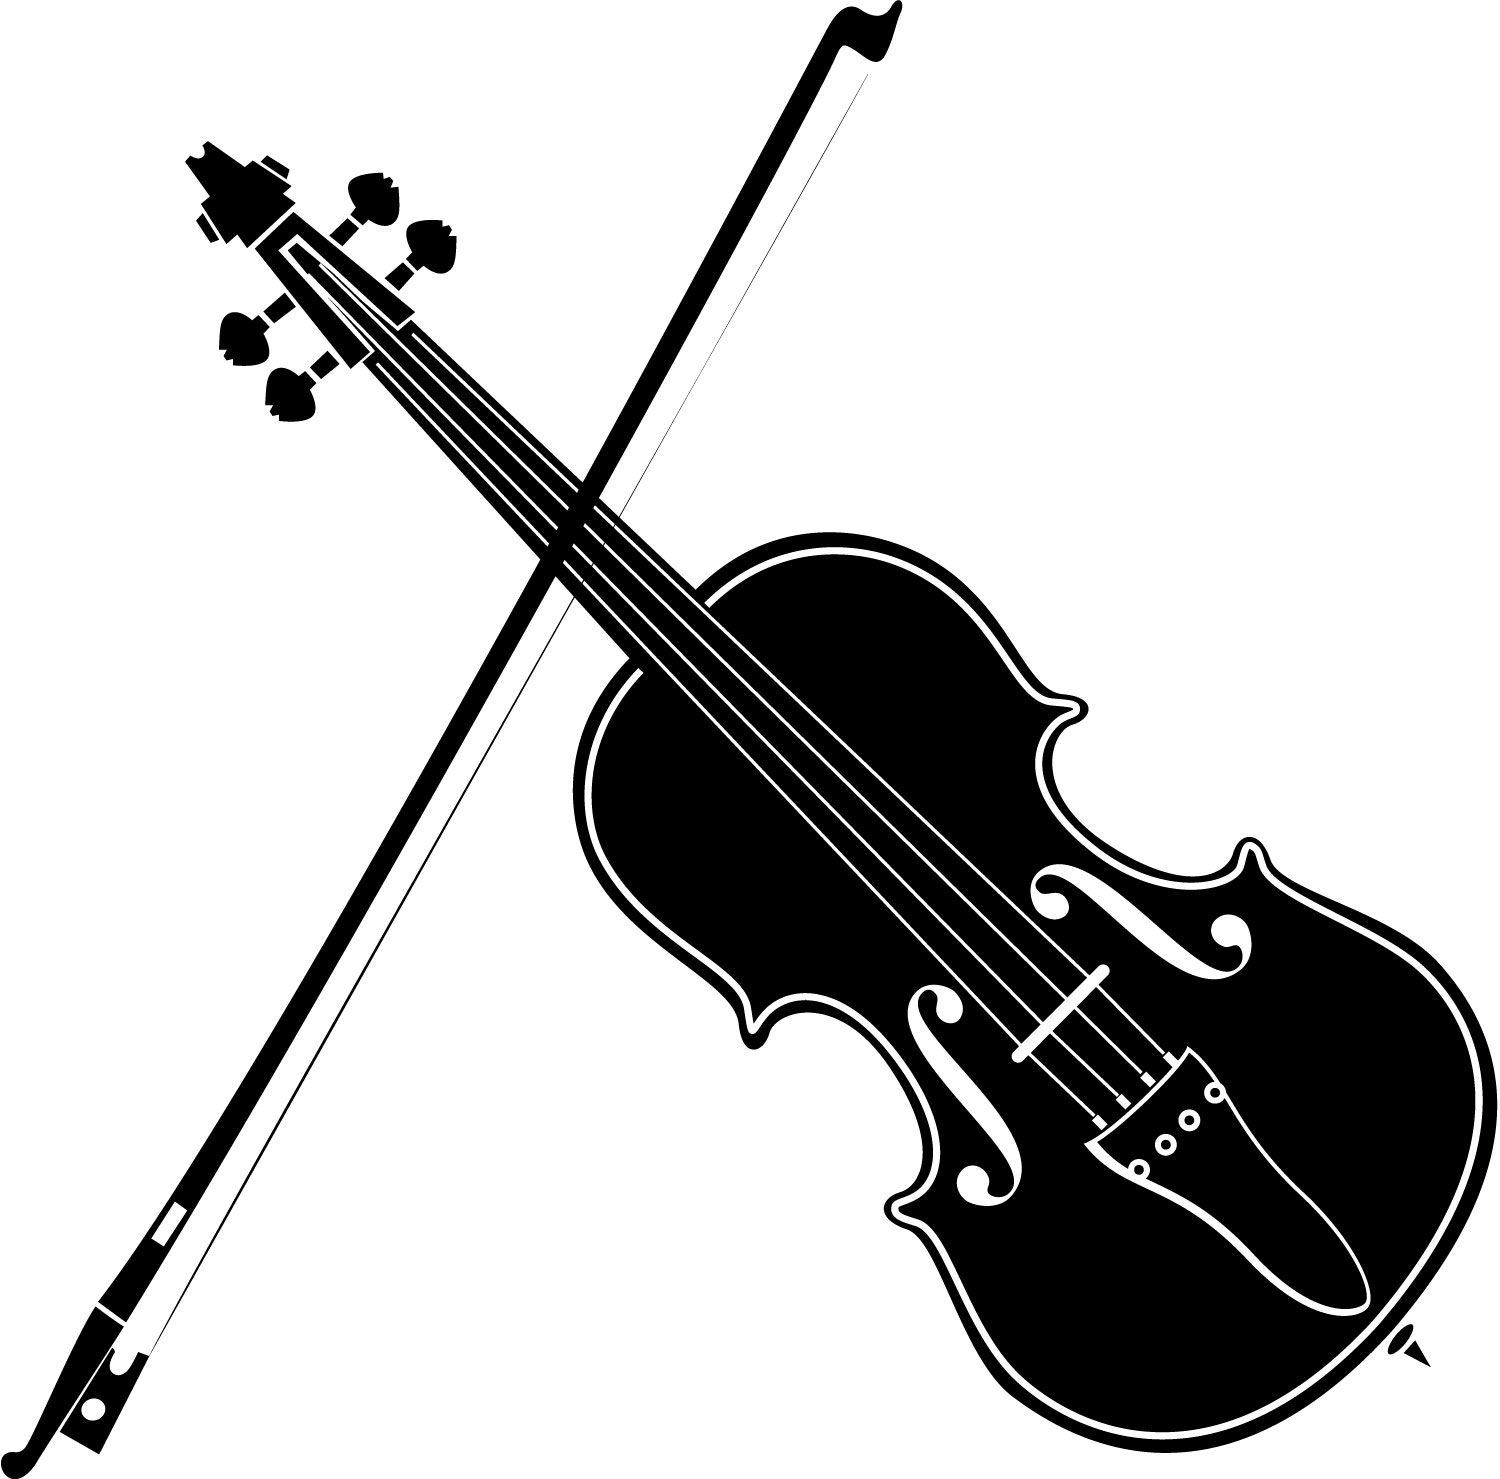 Playing violin clipart.